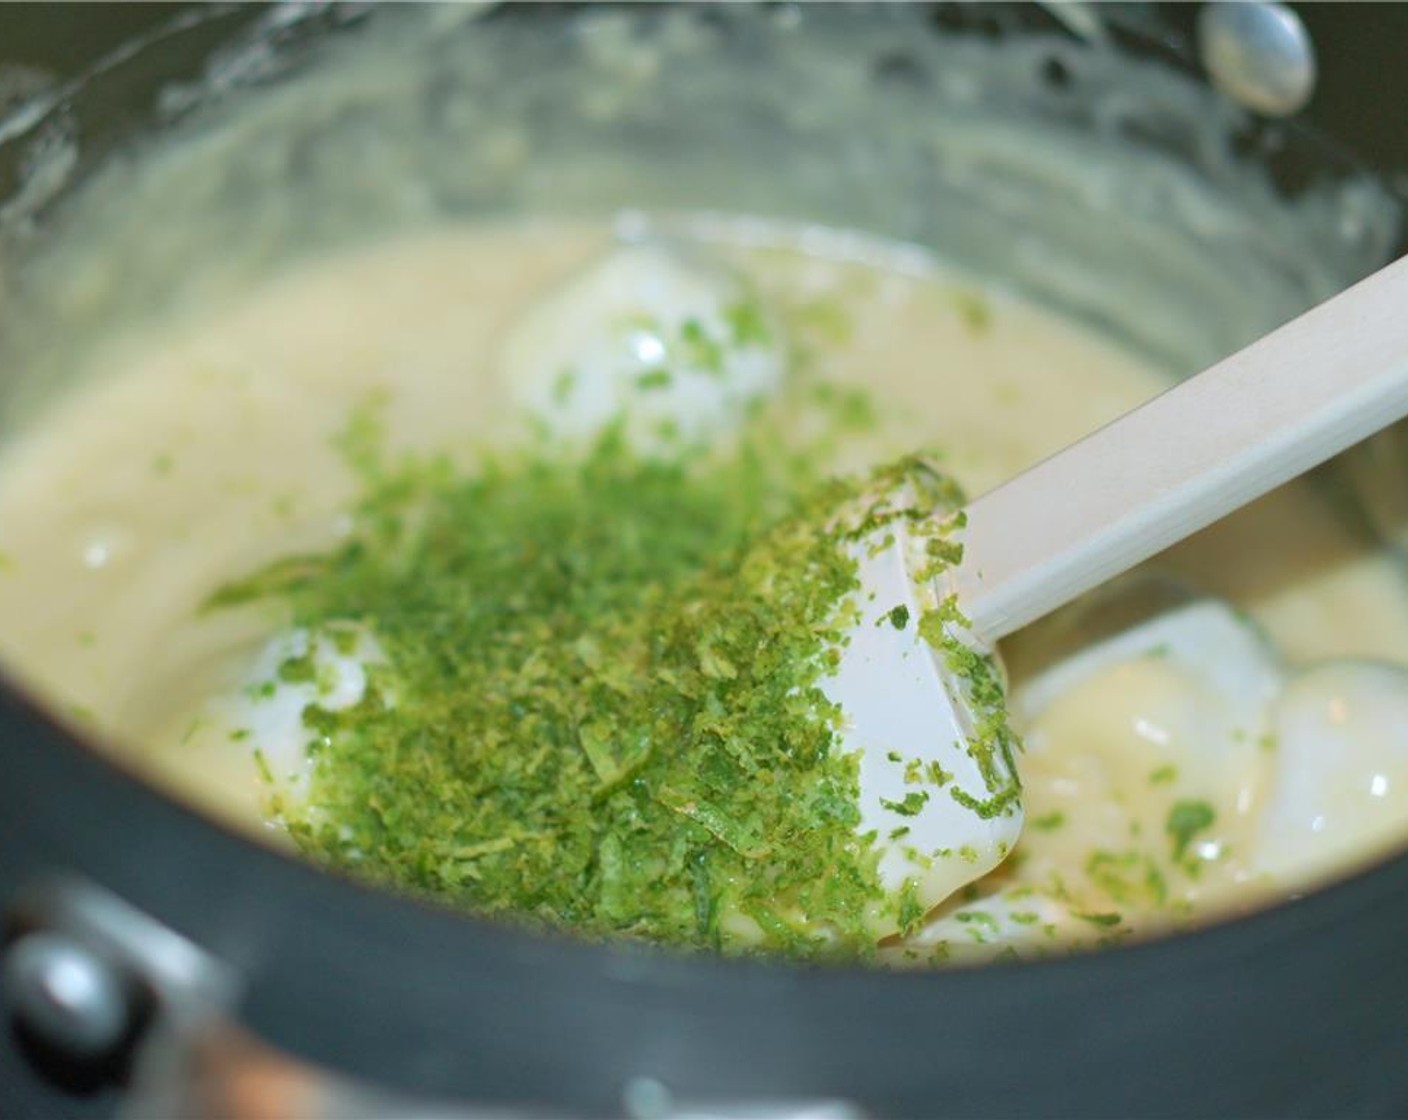 step 5 Remove from heat and stir in the lime zest, lime juice, PATRÓN® Silver Tequila (2 Tbsp), White Chocolate Chunks (2 1/2 cups), White Chocolate Chips (1/2 cup), and Large Marshmallows (12).